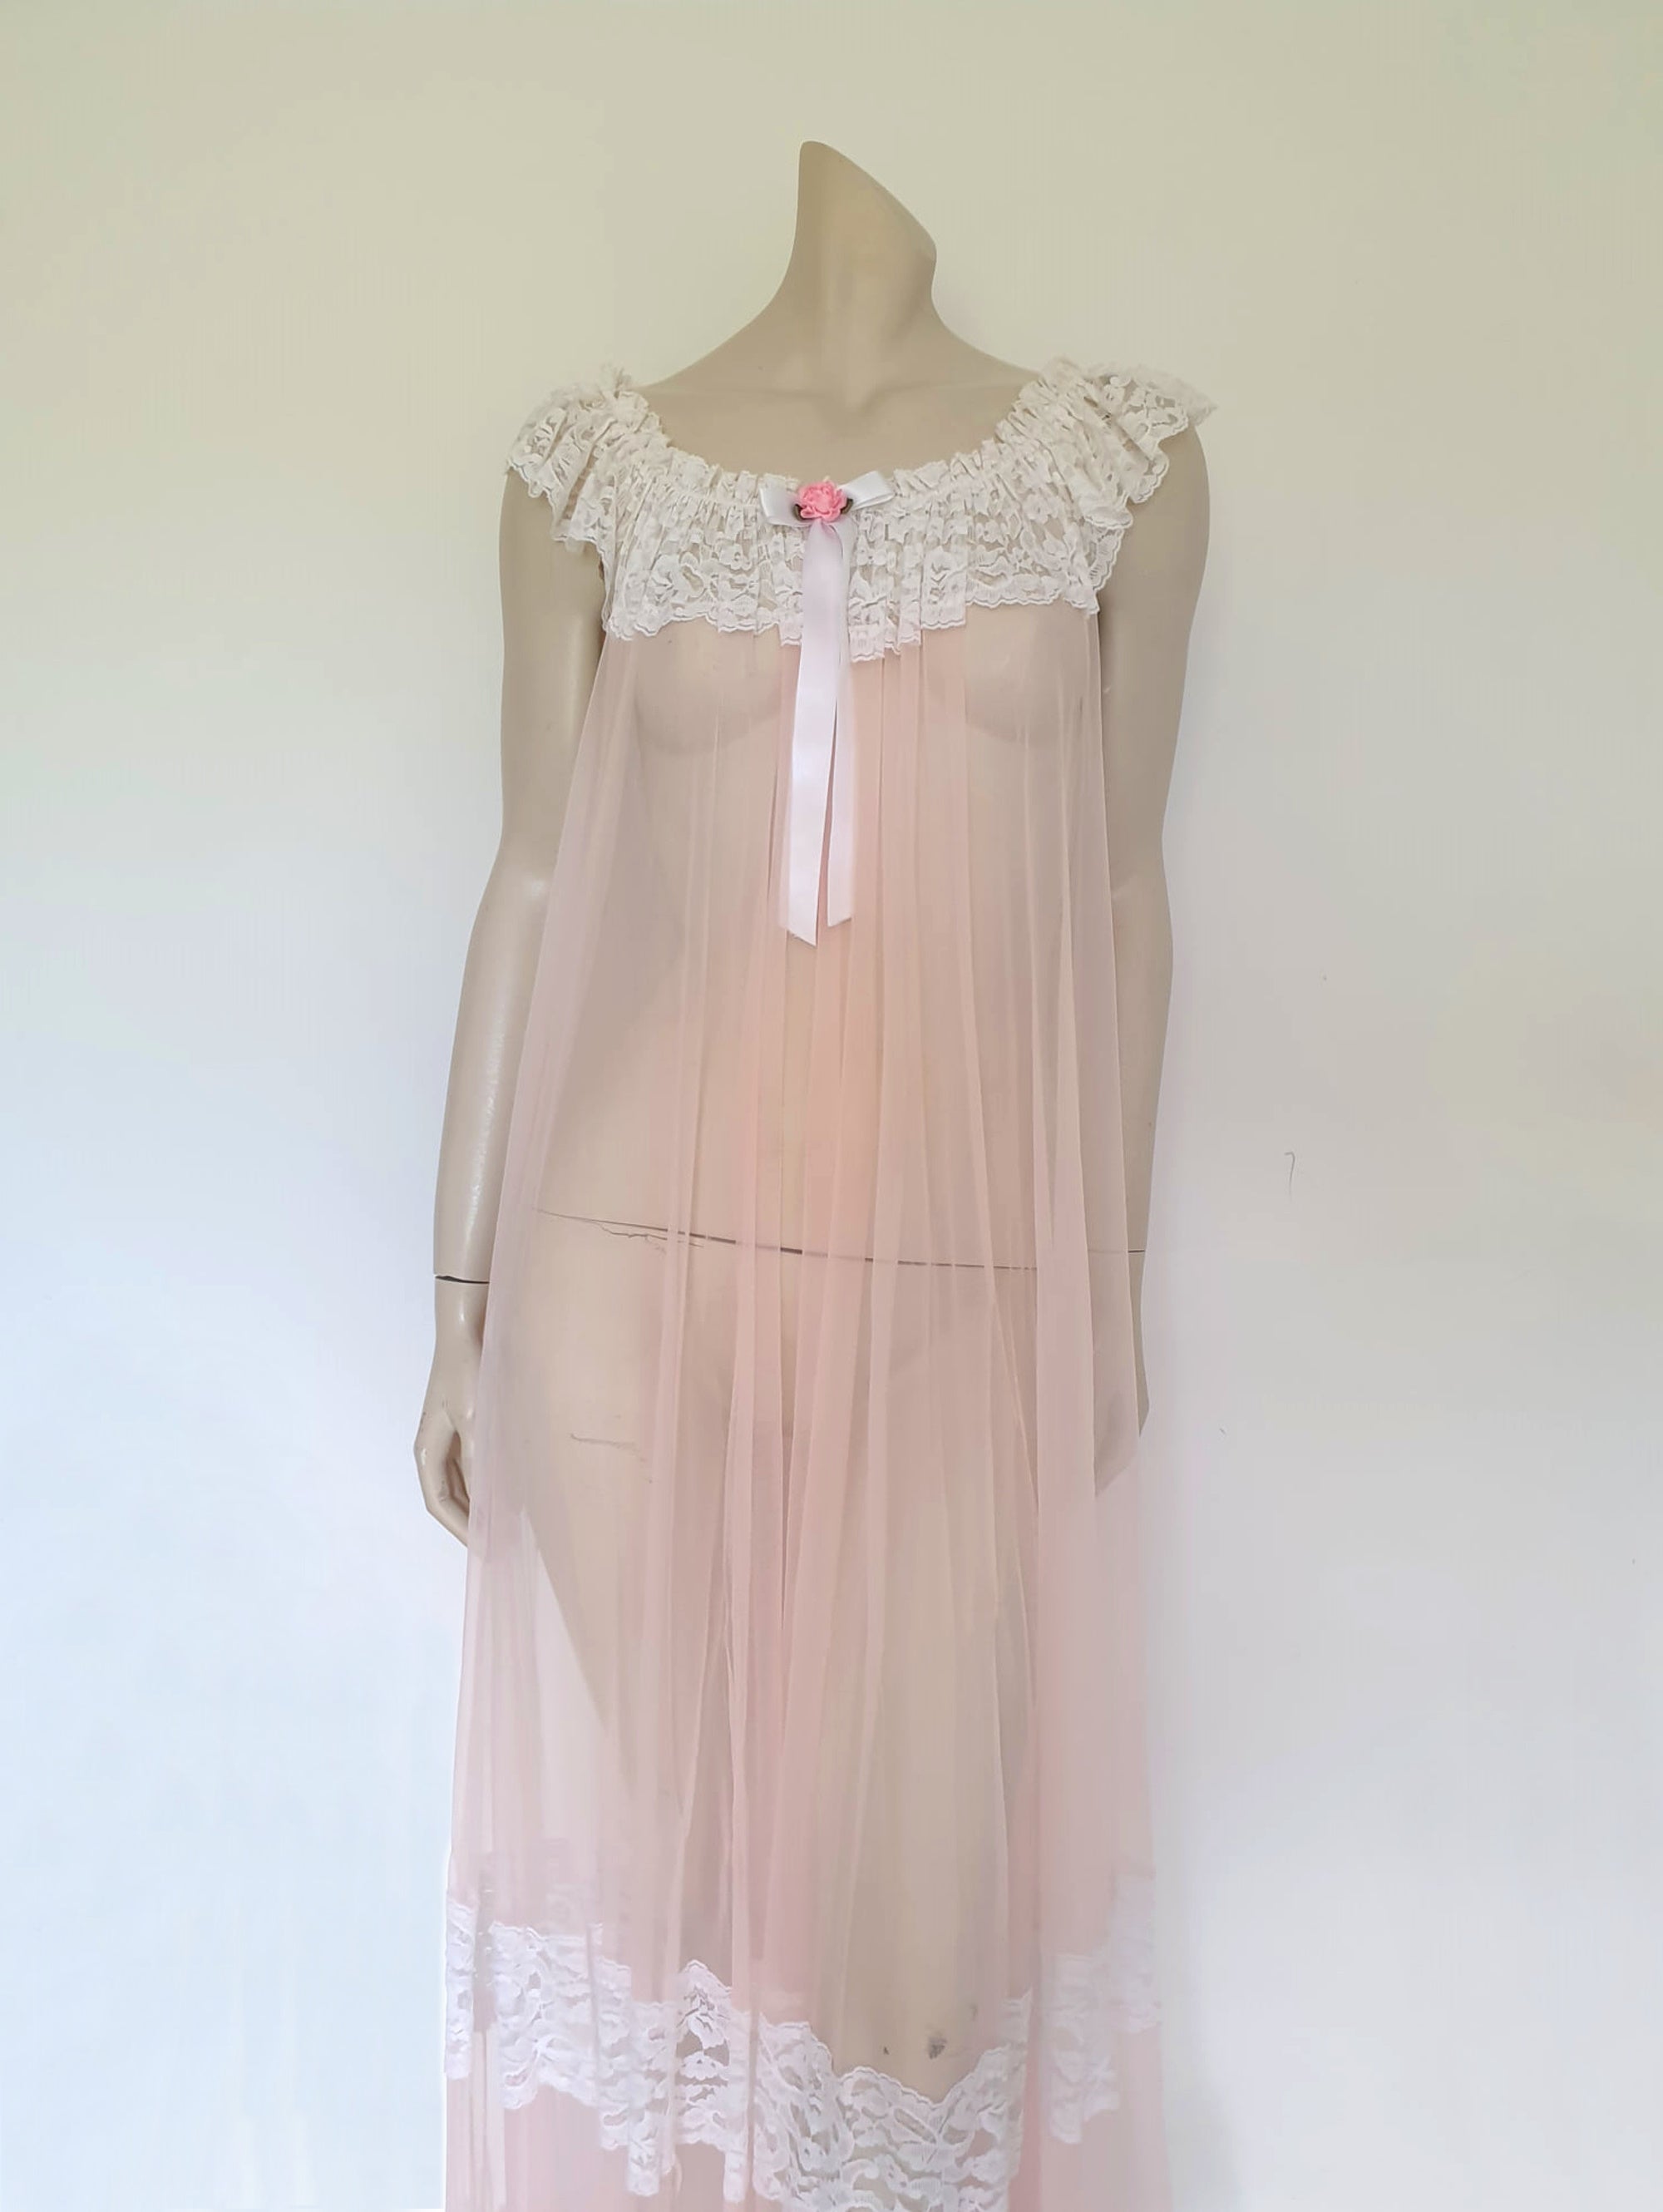 sheer vintage pale pink negligee nightgown with wide lace ruffles and short train